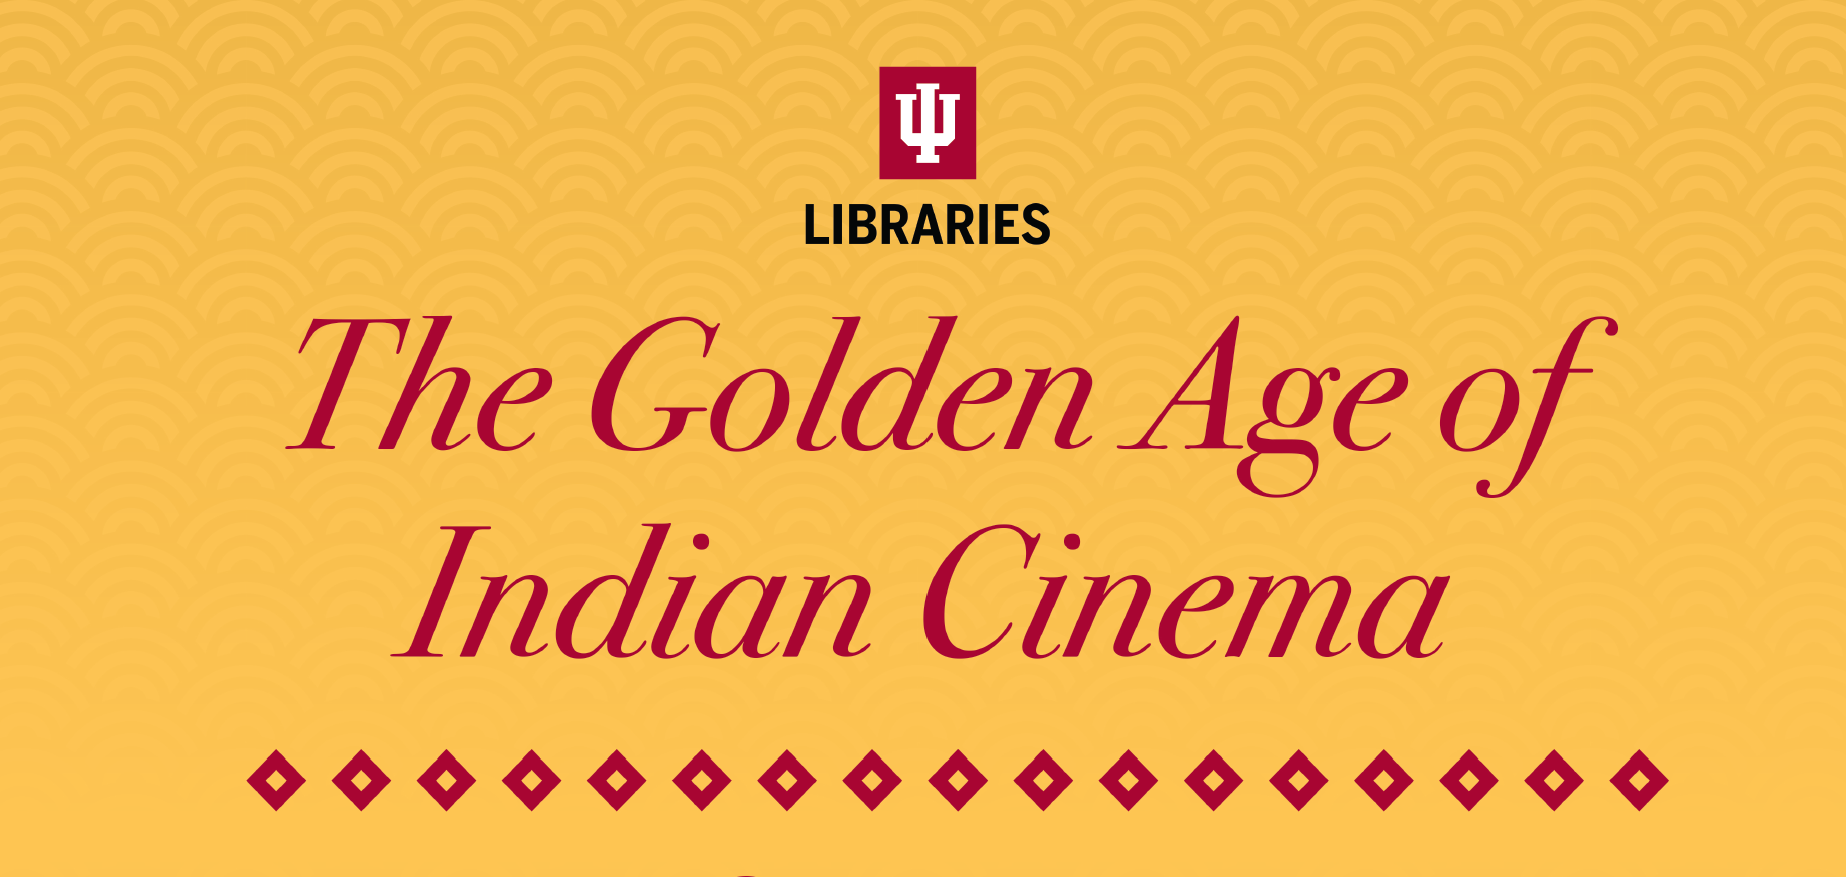 The Golden Age of Indian Cinema